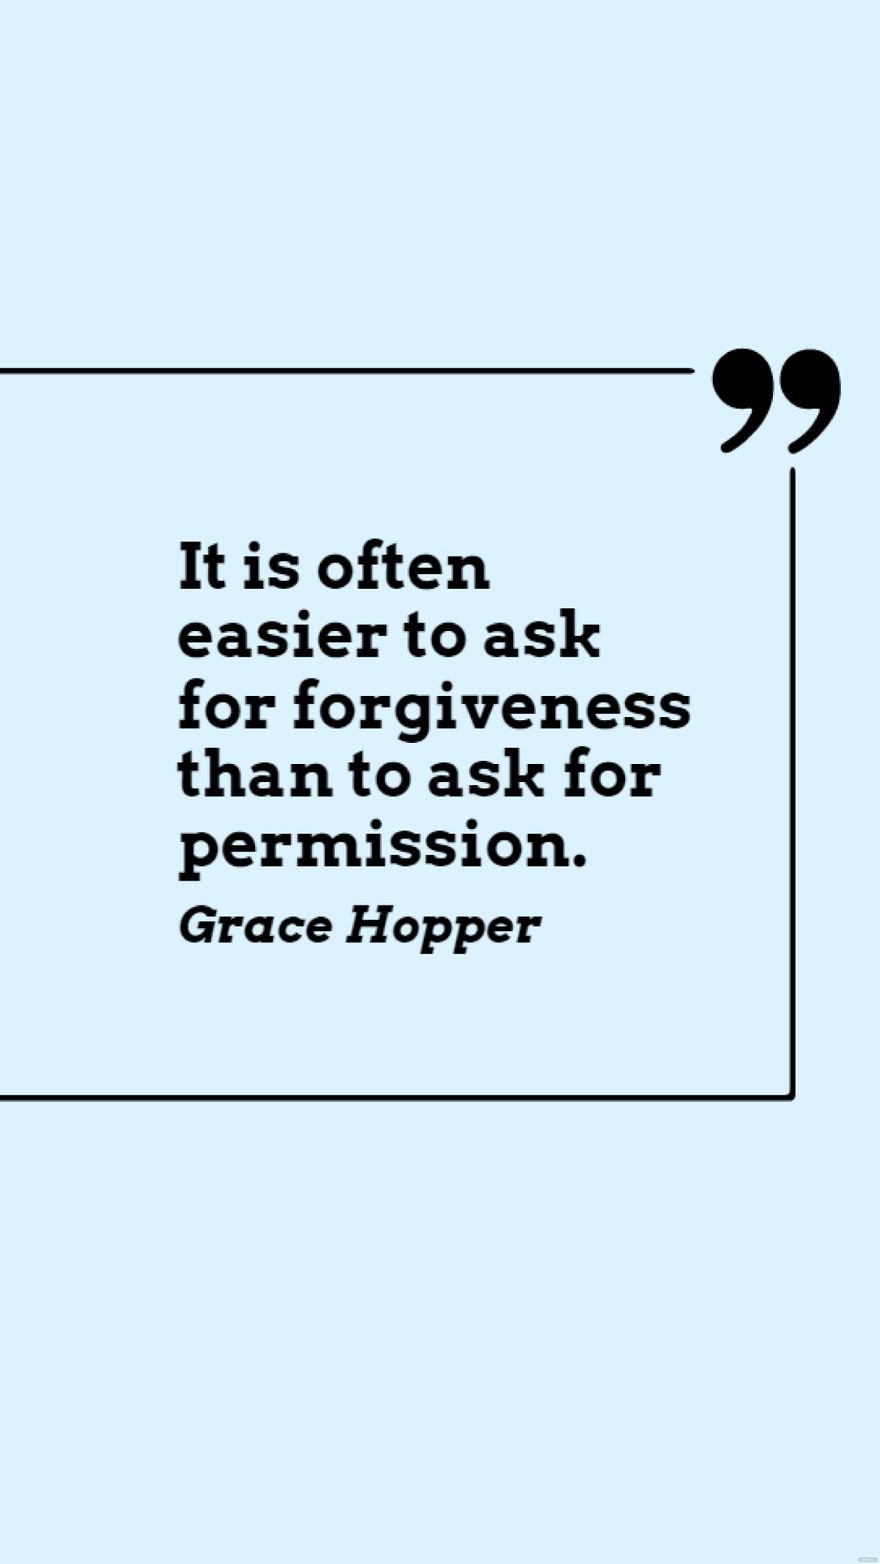 Free Grace Hopper - It is often easier to ask for forgiveness than to ask for permission. in JPG